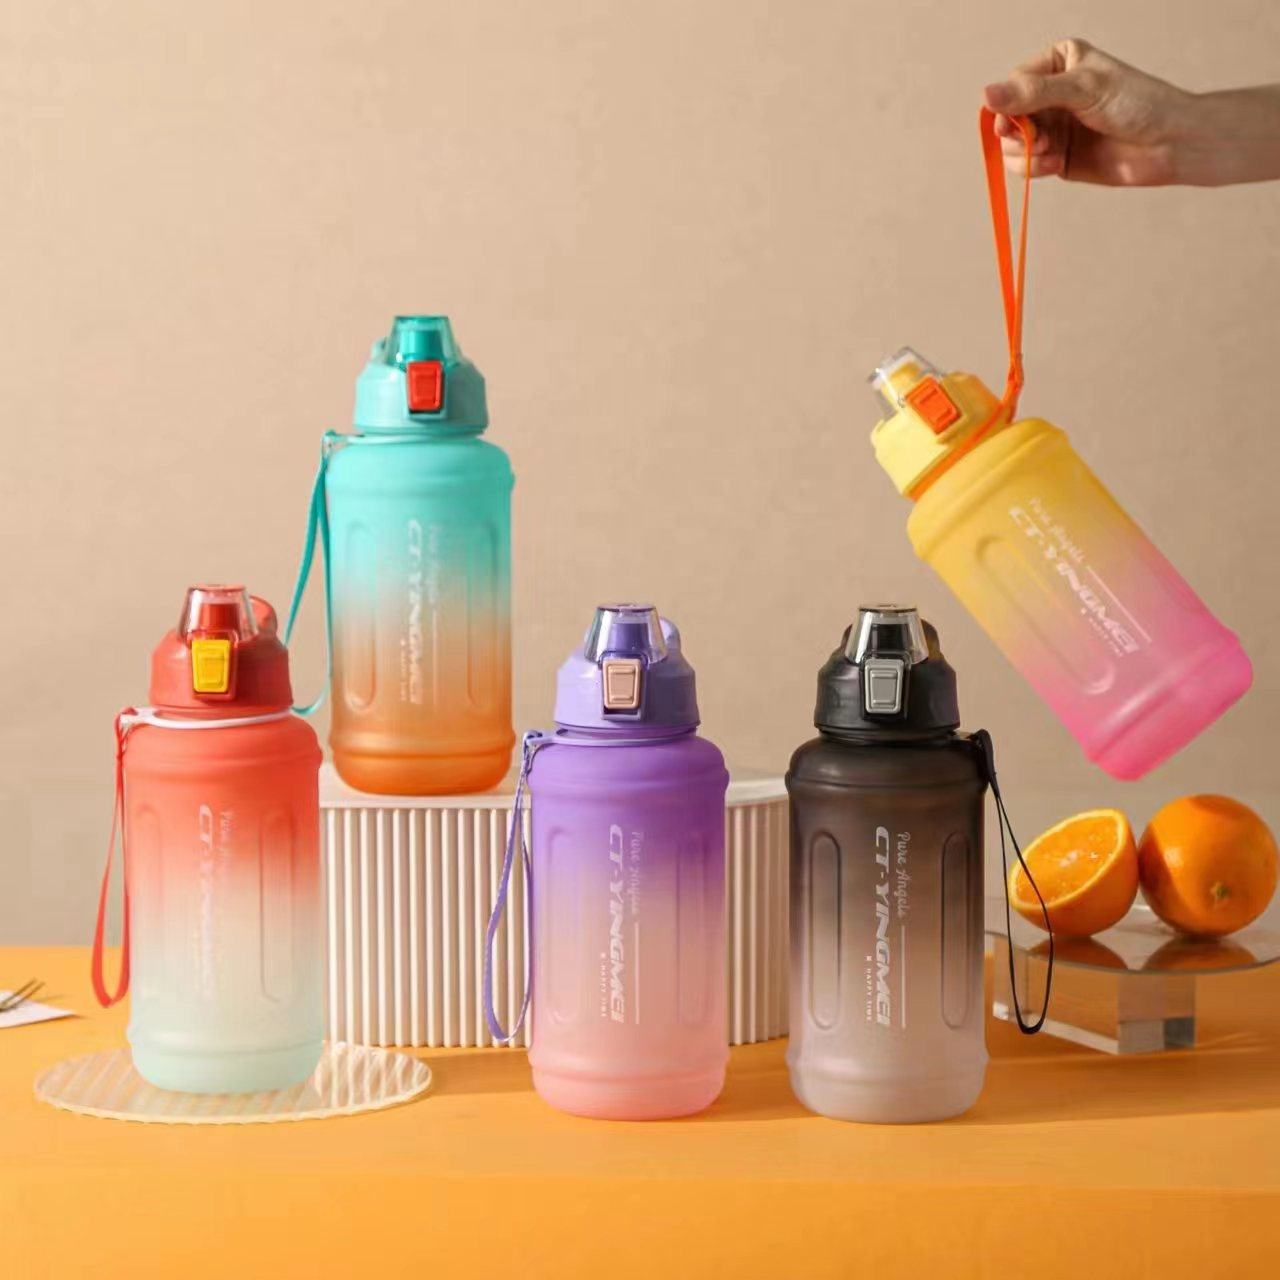 THVALUE 64 Oz Motivational Water Bottle with Straw And Strap Plastic Water Bottle for Gym 1300ml 